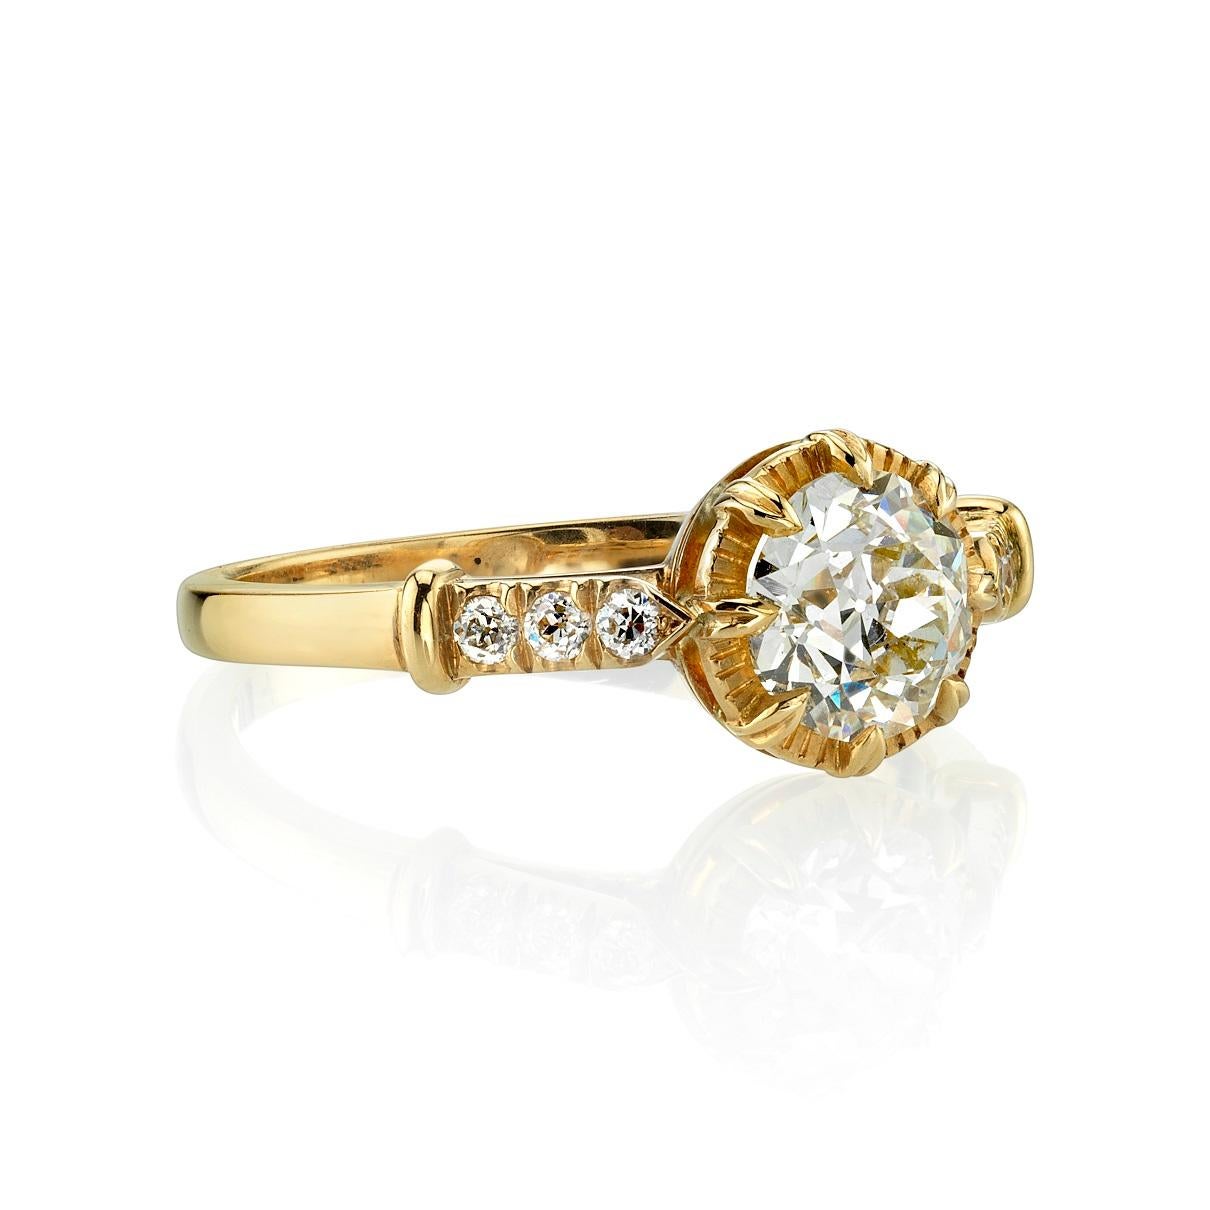 0.96ct J/VS1 GIA certified old European cut diamond with 0.11ctw old European cut accent diamonds set in a handcrafted 18K yellow gold mounting.

Ring is currently size 6. Please contact us about potential re-sizing.

Our jewelry is made locally in